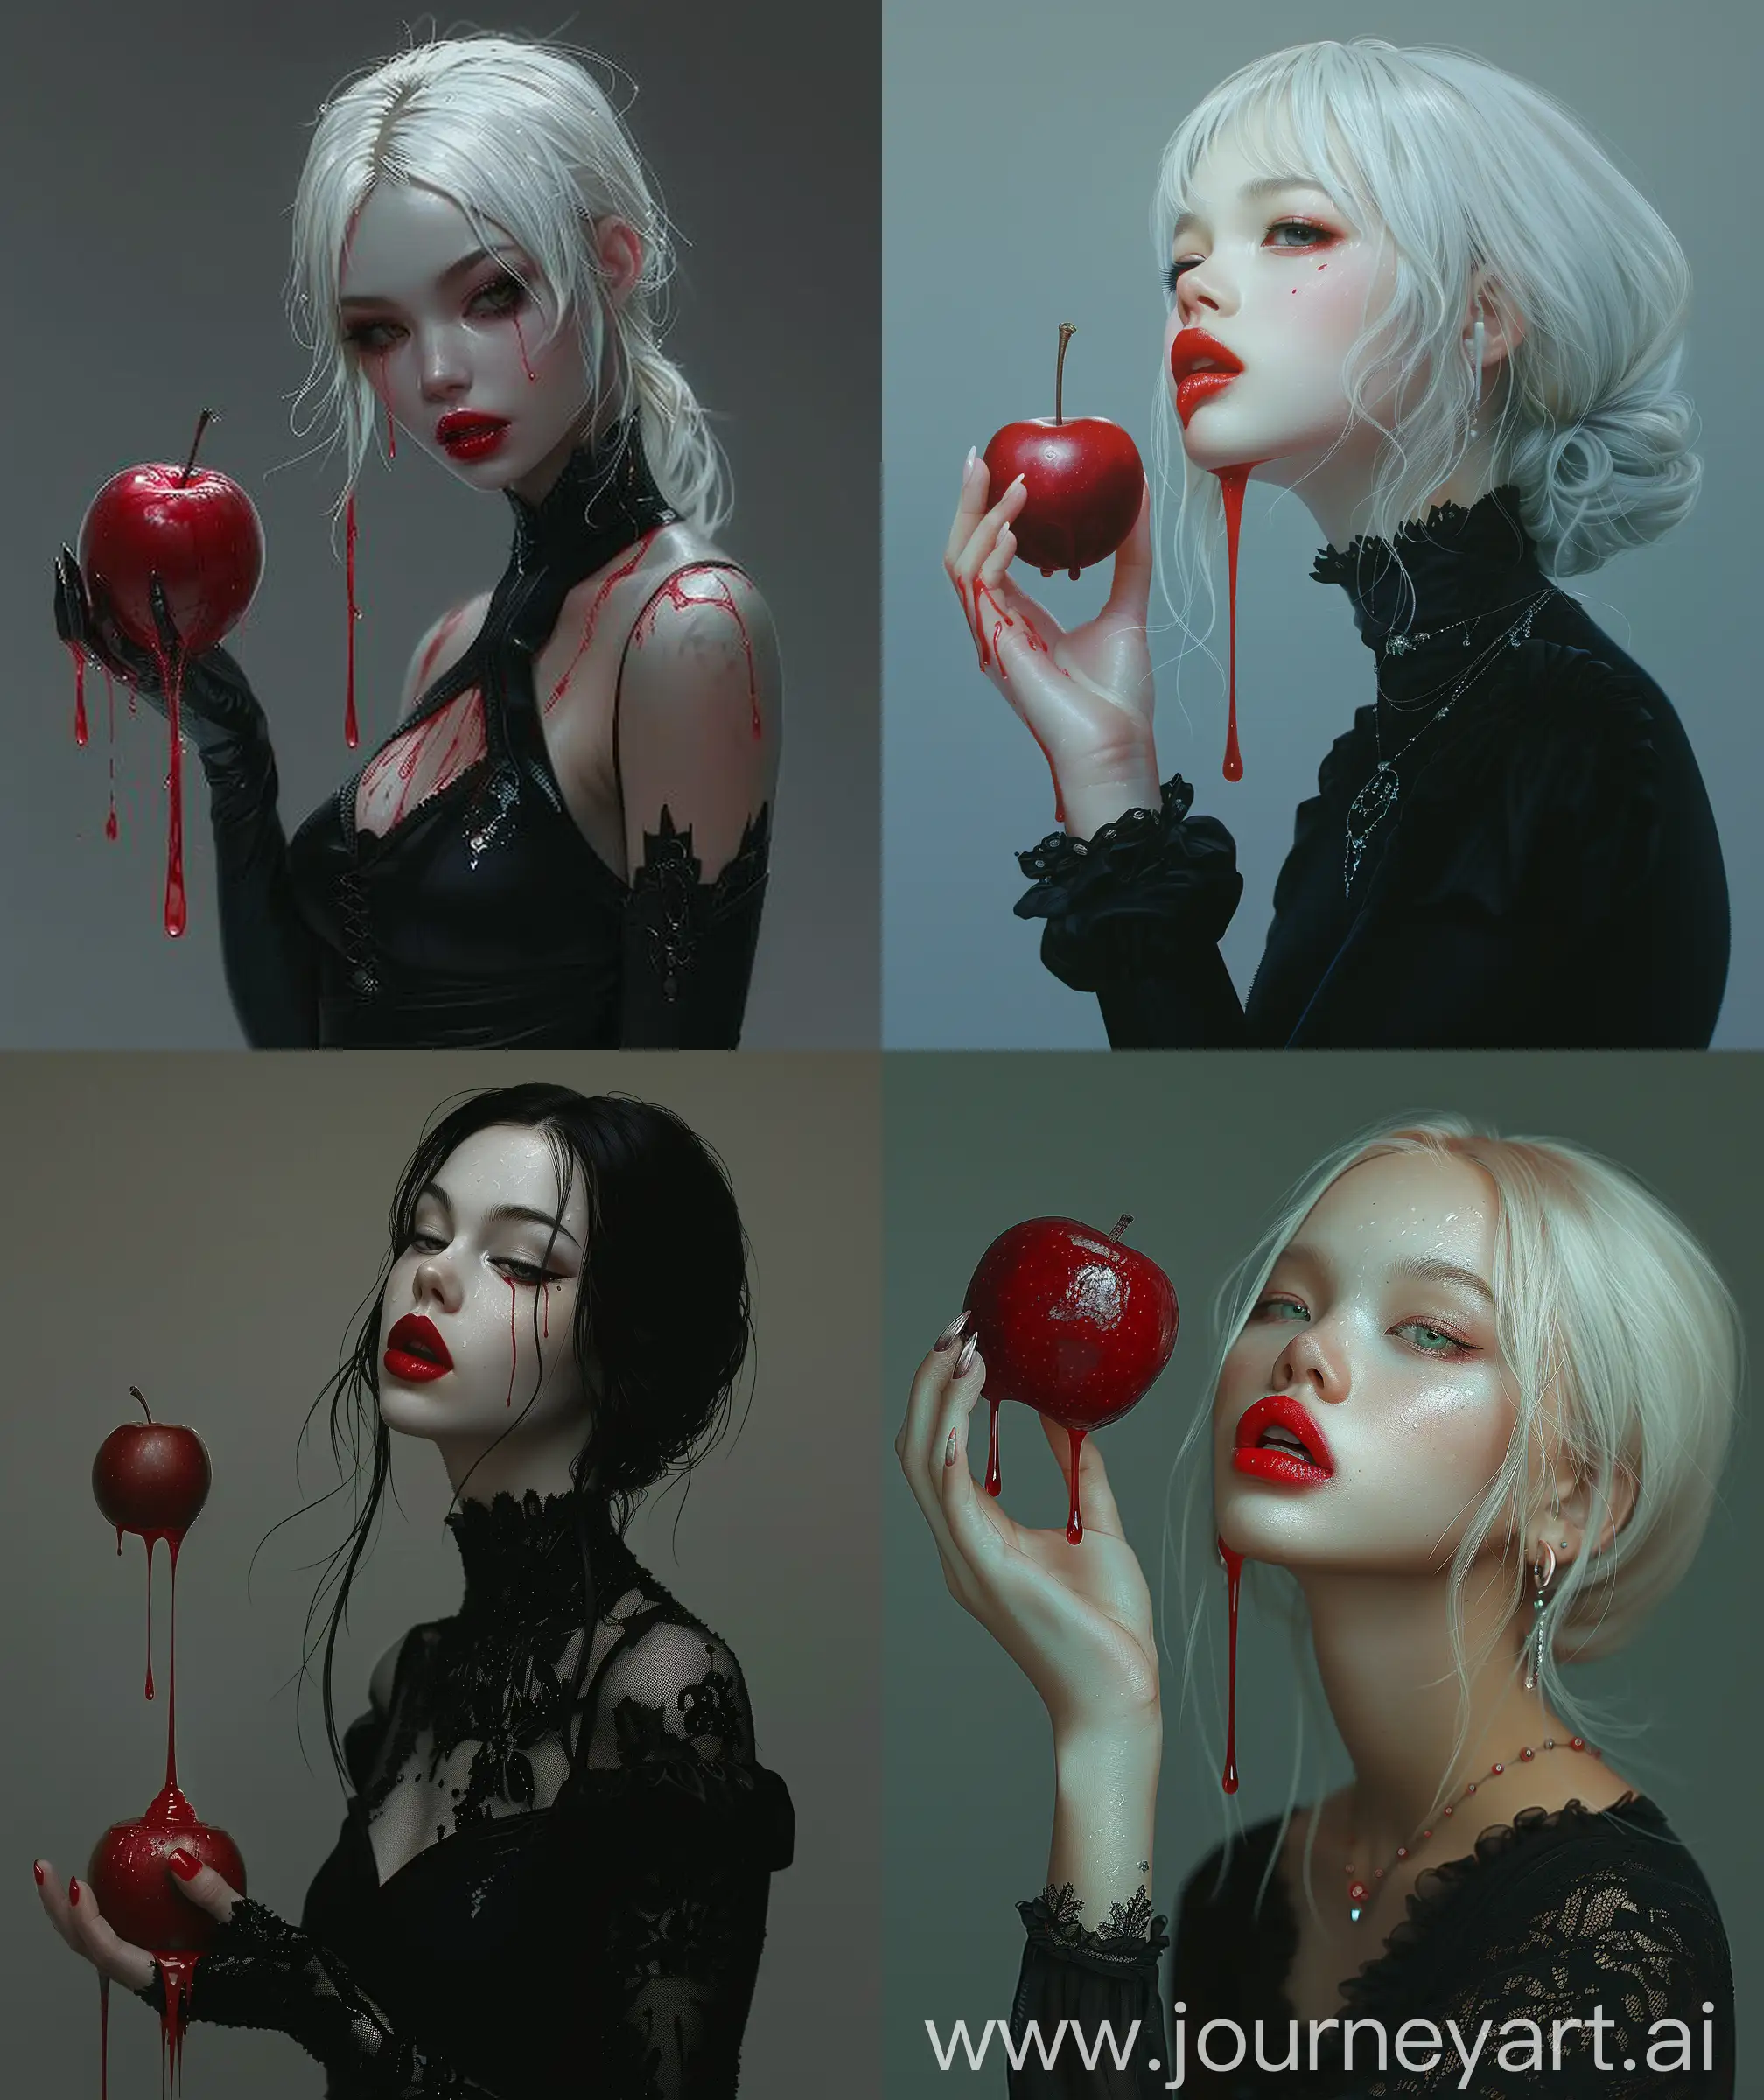 Surreal-Anime-Portrait-of-Elegant-Woman-with-Dripping-Red-Apple